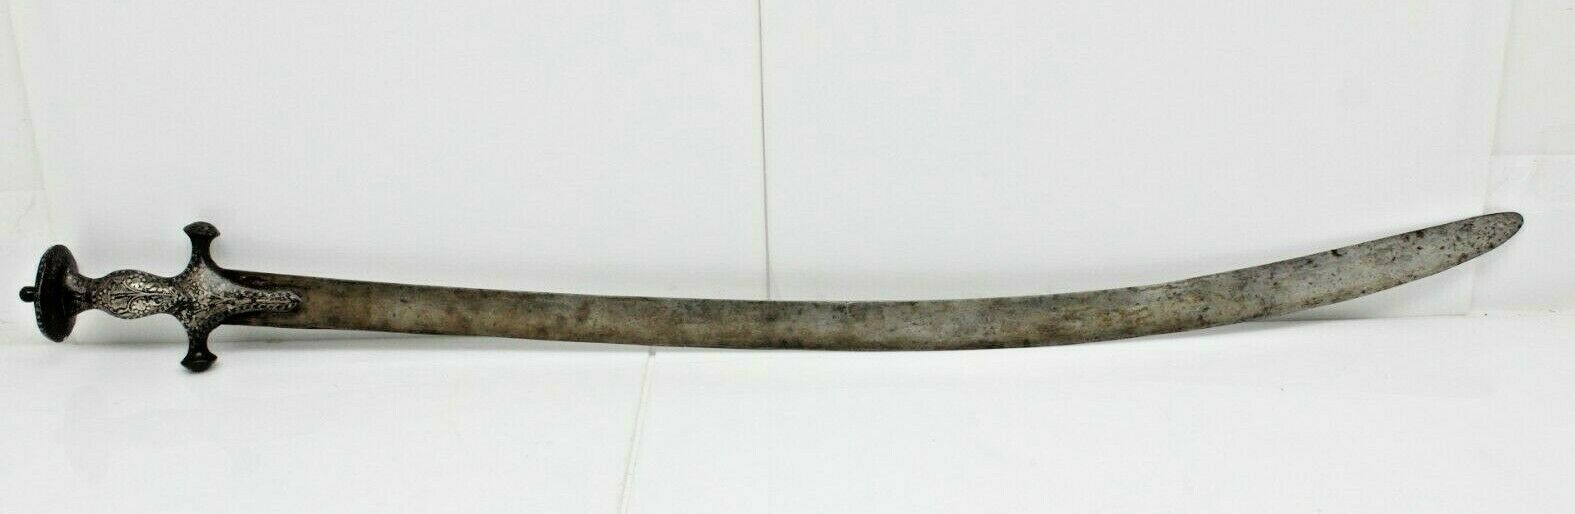 Authentic 18th Indo-persian islamic saber